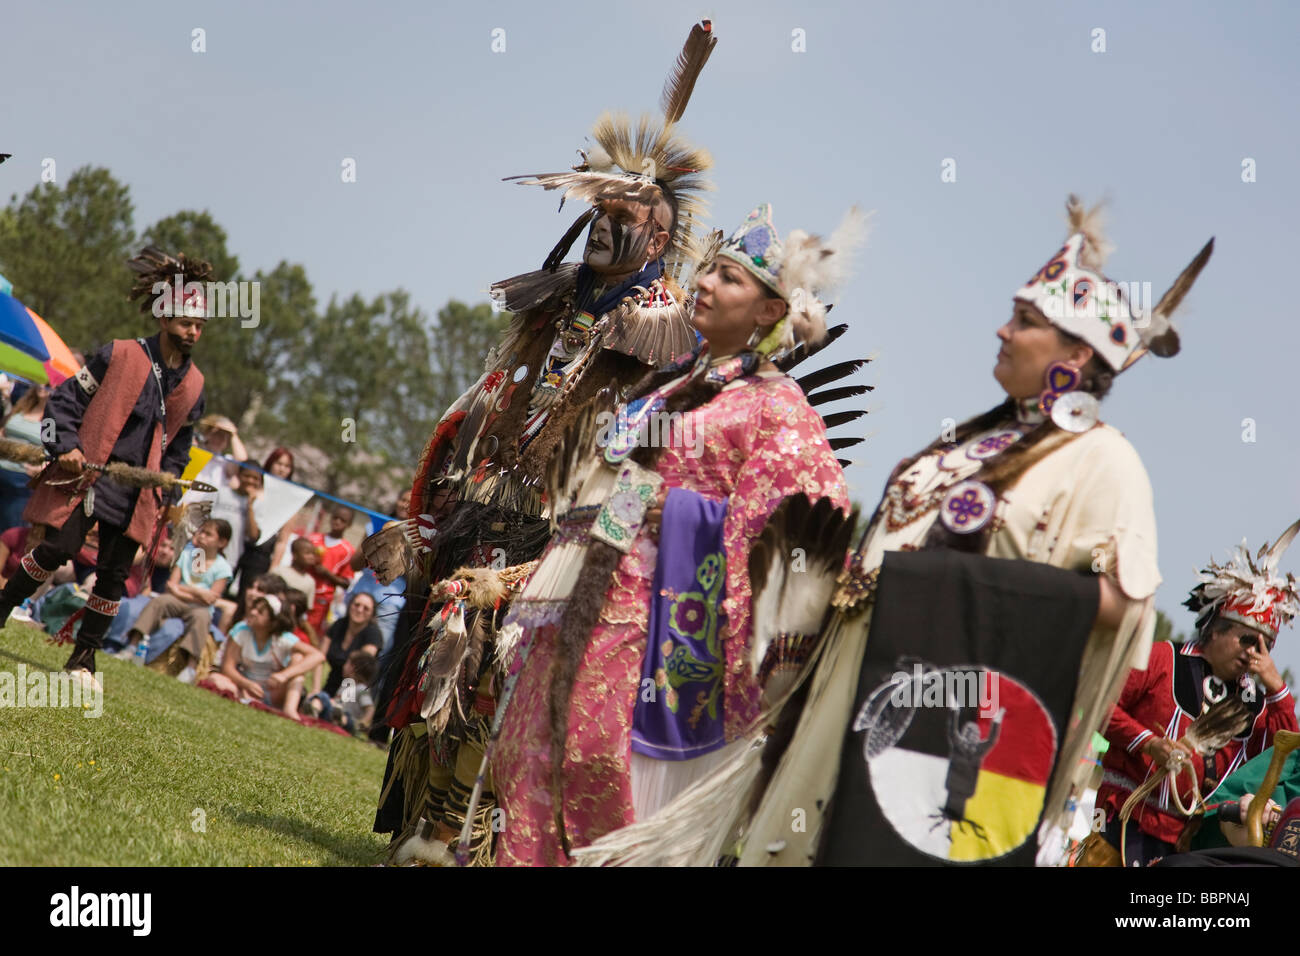 Native Americans dance at the 8th Annual Red Wing PowWow in Virginia ...